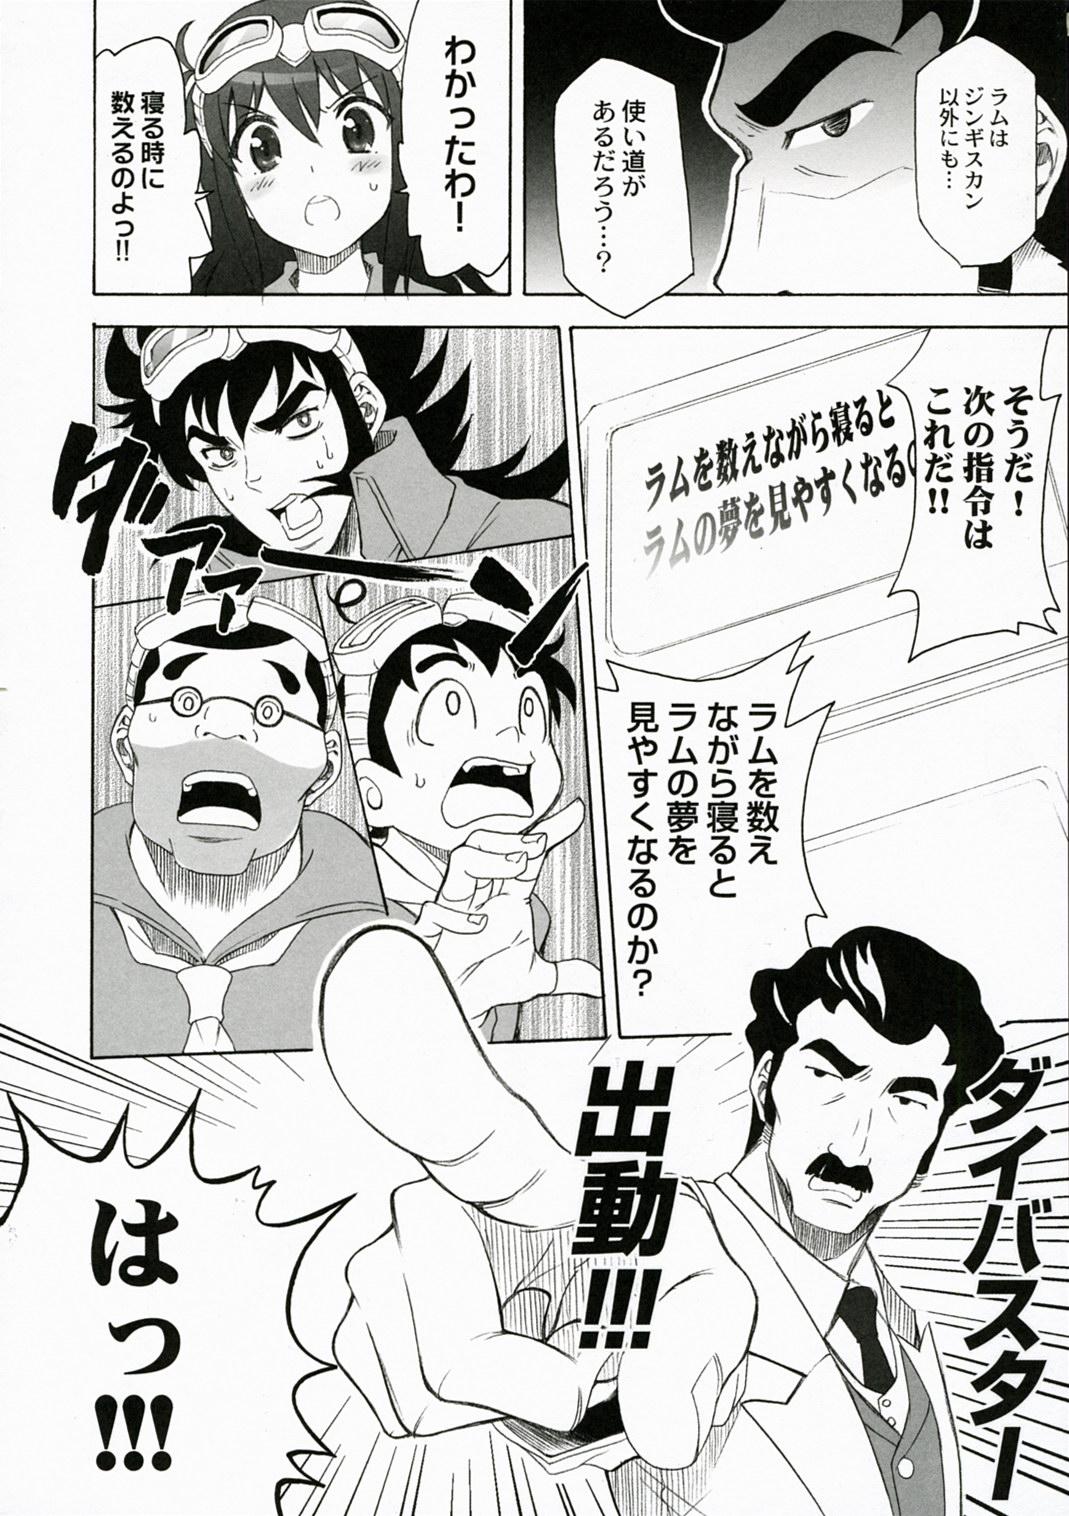 Groping QPchick11 Diebuster! Seichi ni tatsu - Diebuster Brunettes - Page 9